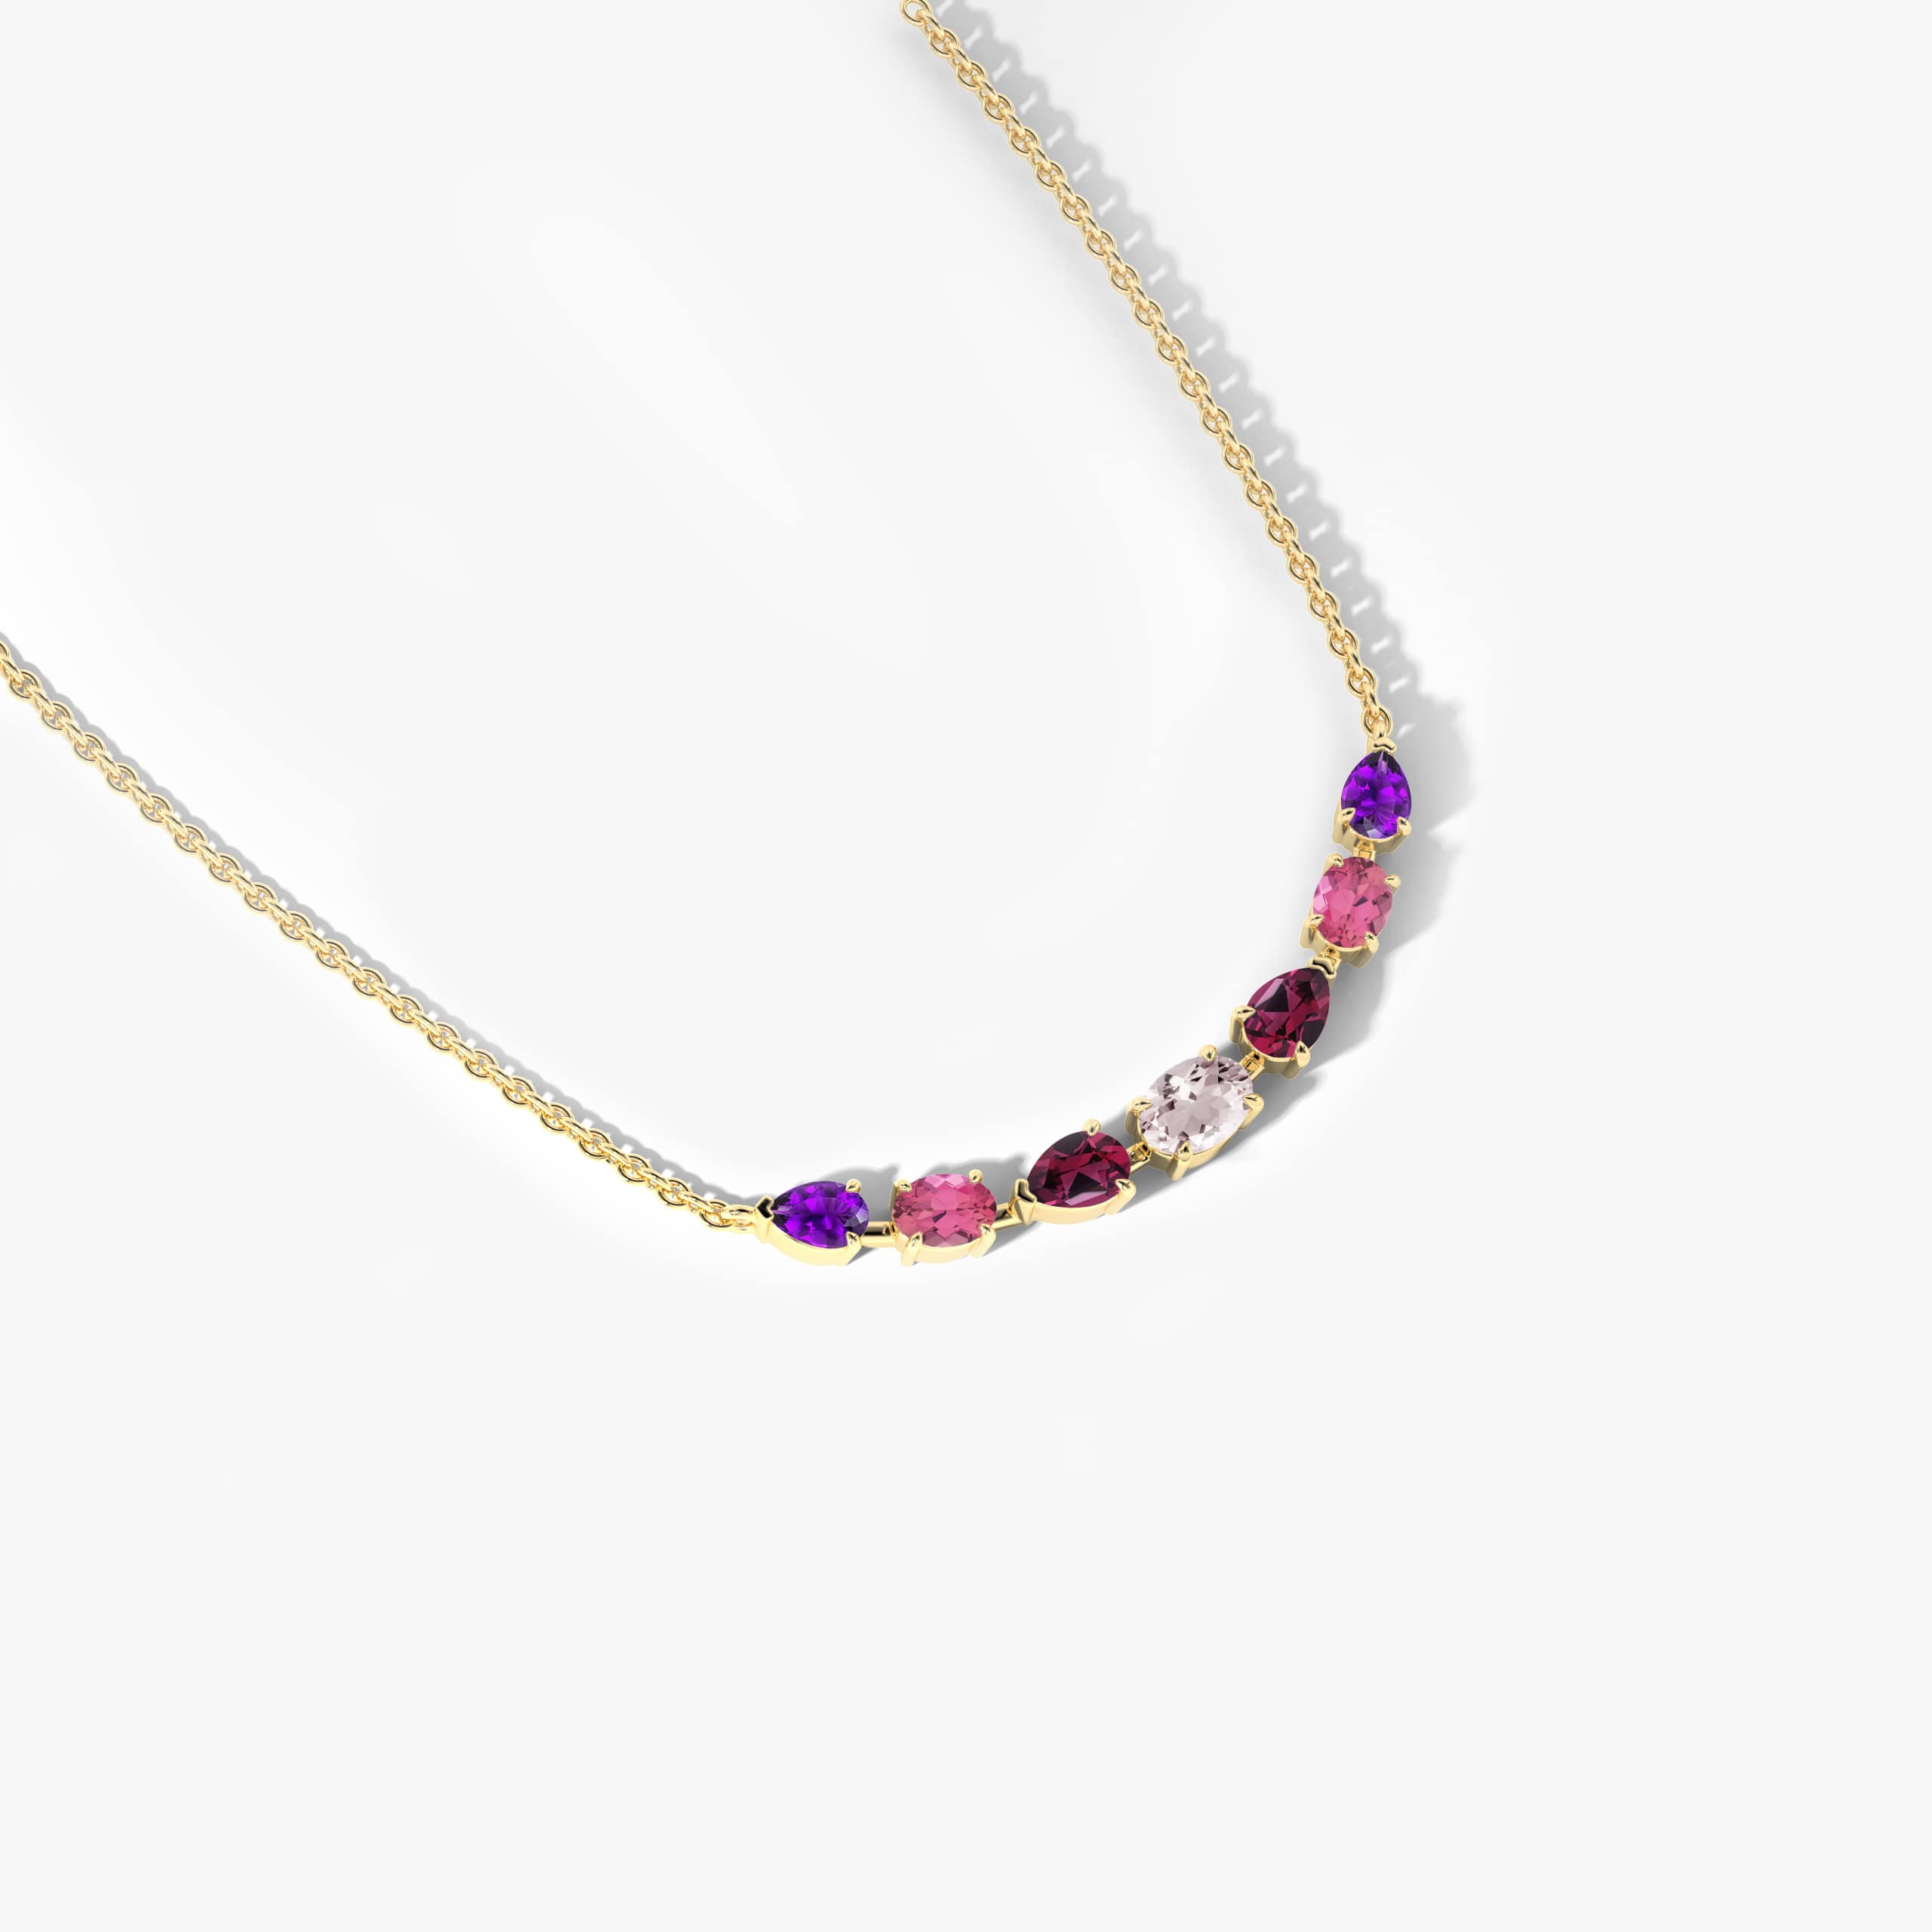 Pink combination gemstone necklace in yellow gold